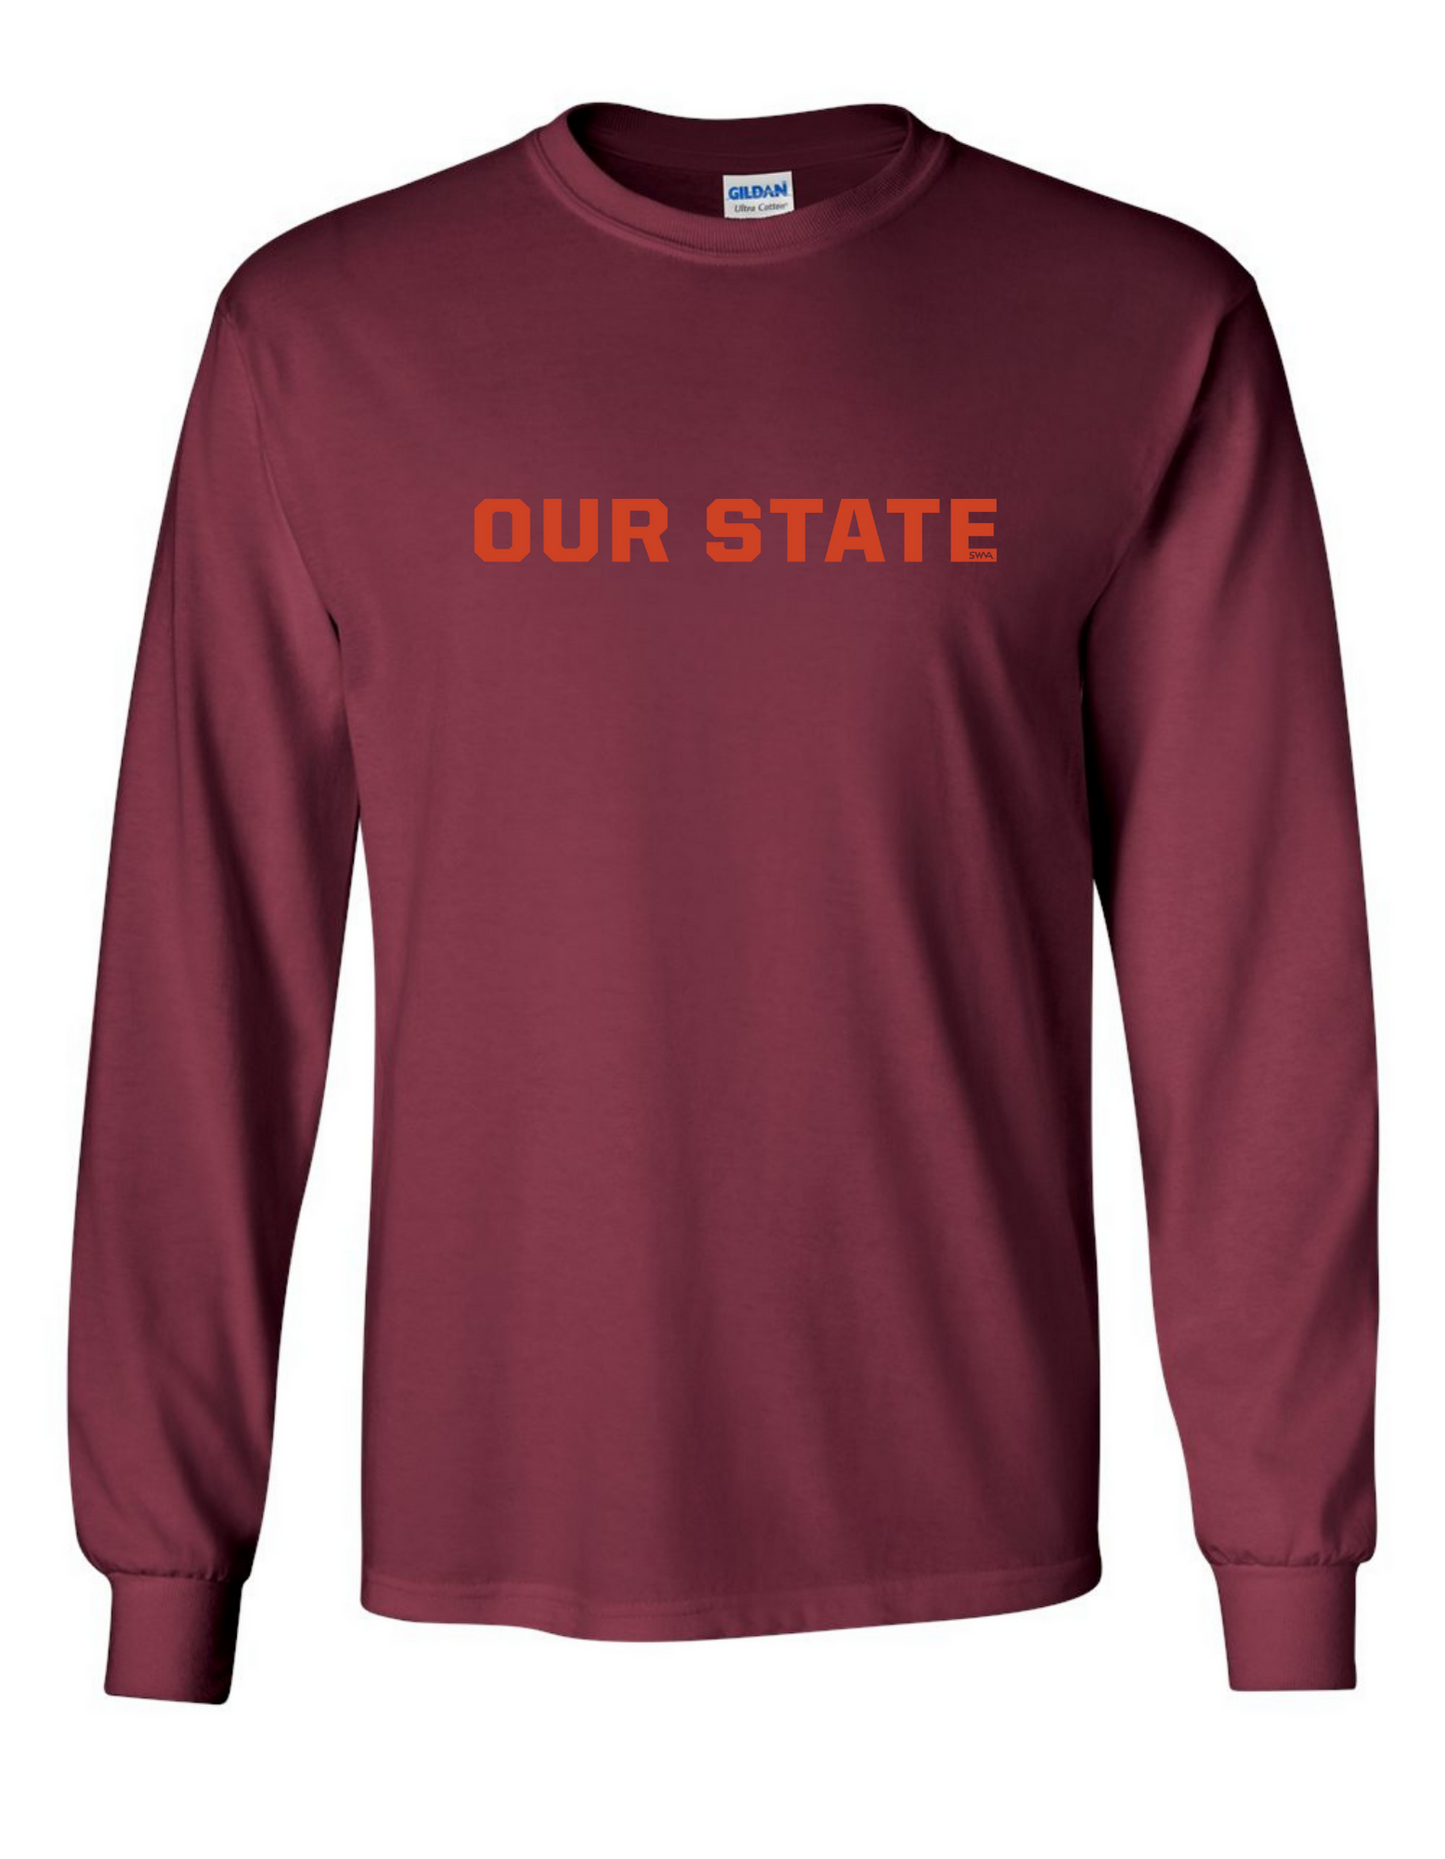 "This is my school. This is home. That's it." - Long Sleeve Shirt (Medium) - SALE